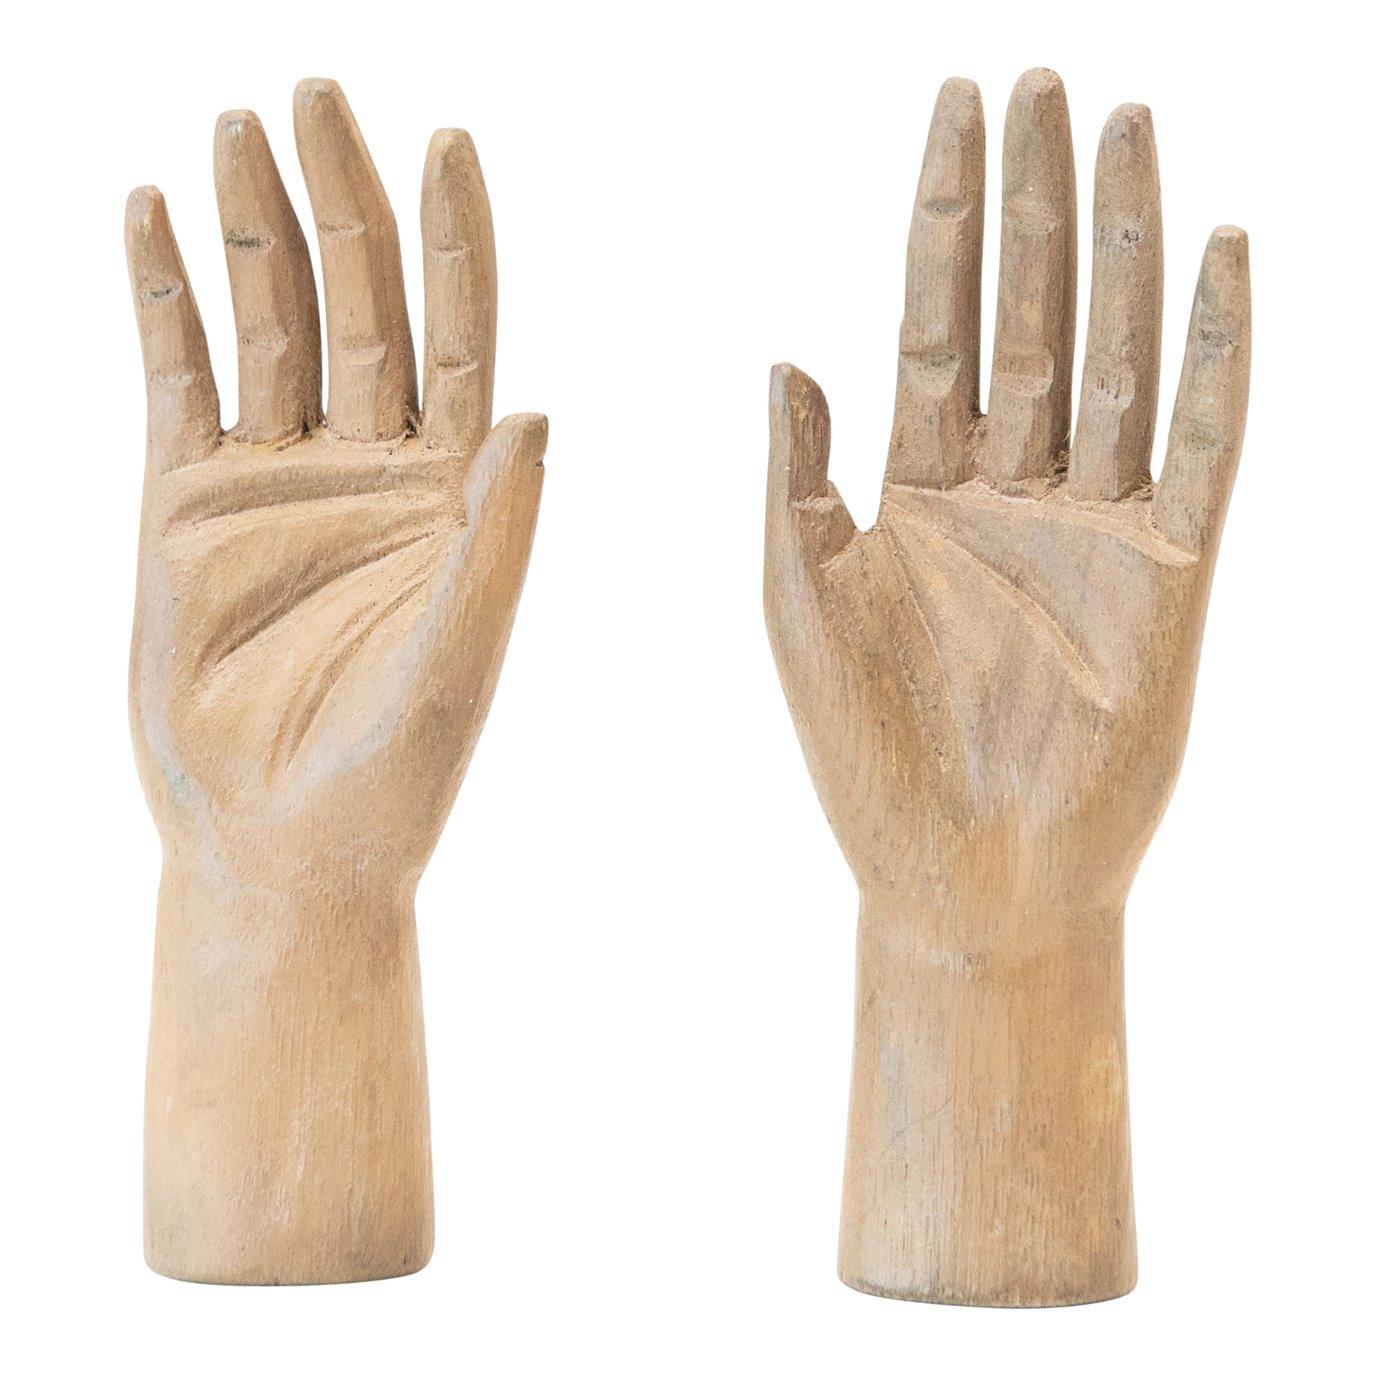 Hand-Carved Mango Wood Hands, Painted Finish, Set of 2 (Each One Will Vary)